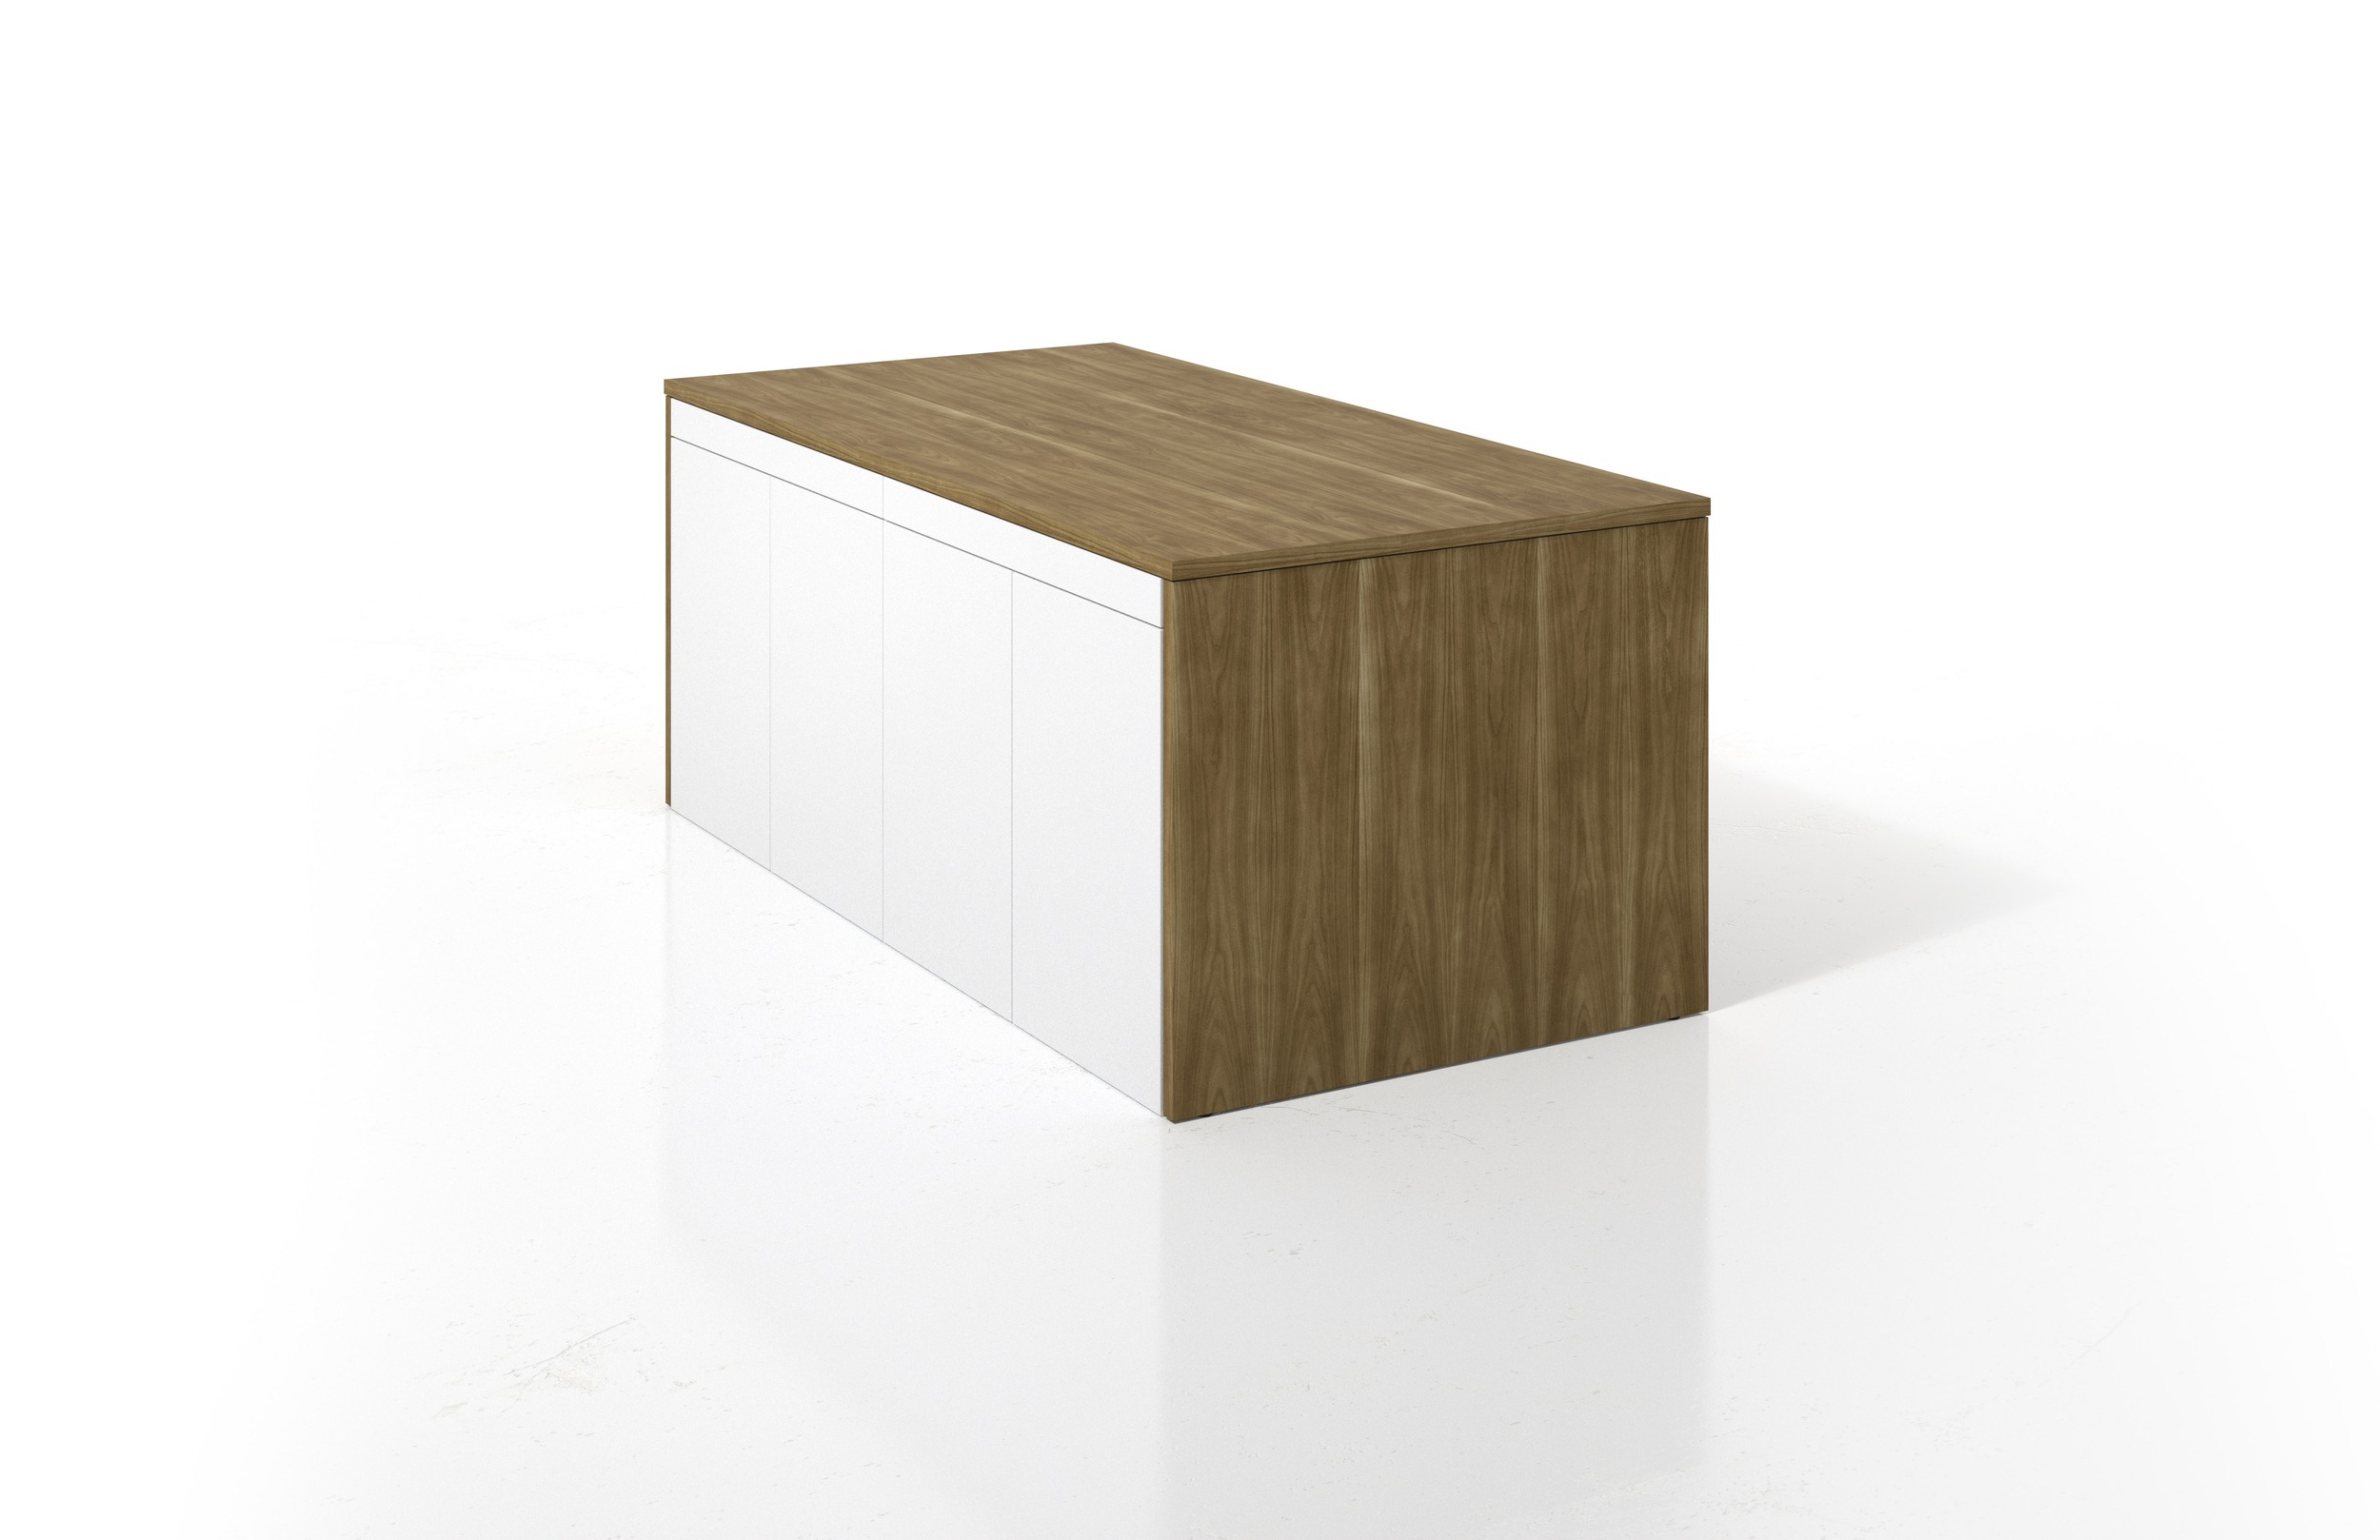 1021-1029-1006 (Best of Neocon - Standing Height Table - with Closed Storage) small.jpg